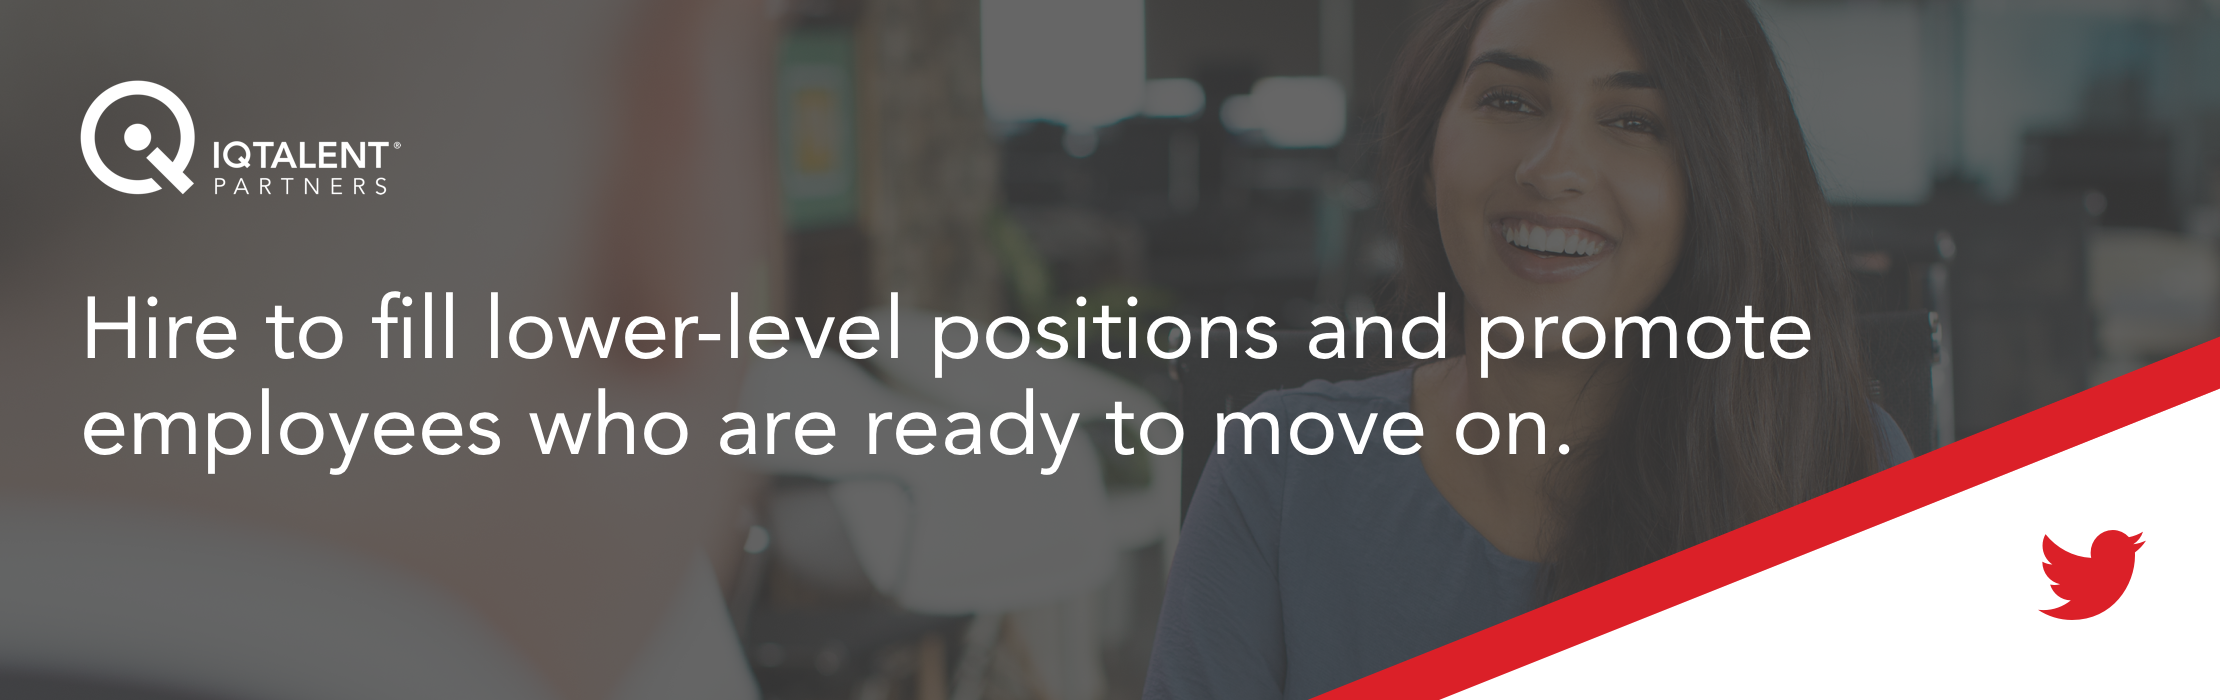 Hire to fill lower-level positions and promote employees who are ready to move on.